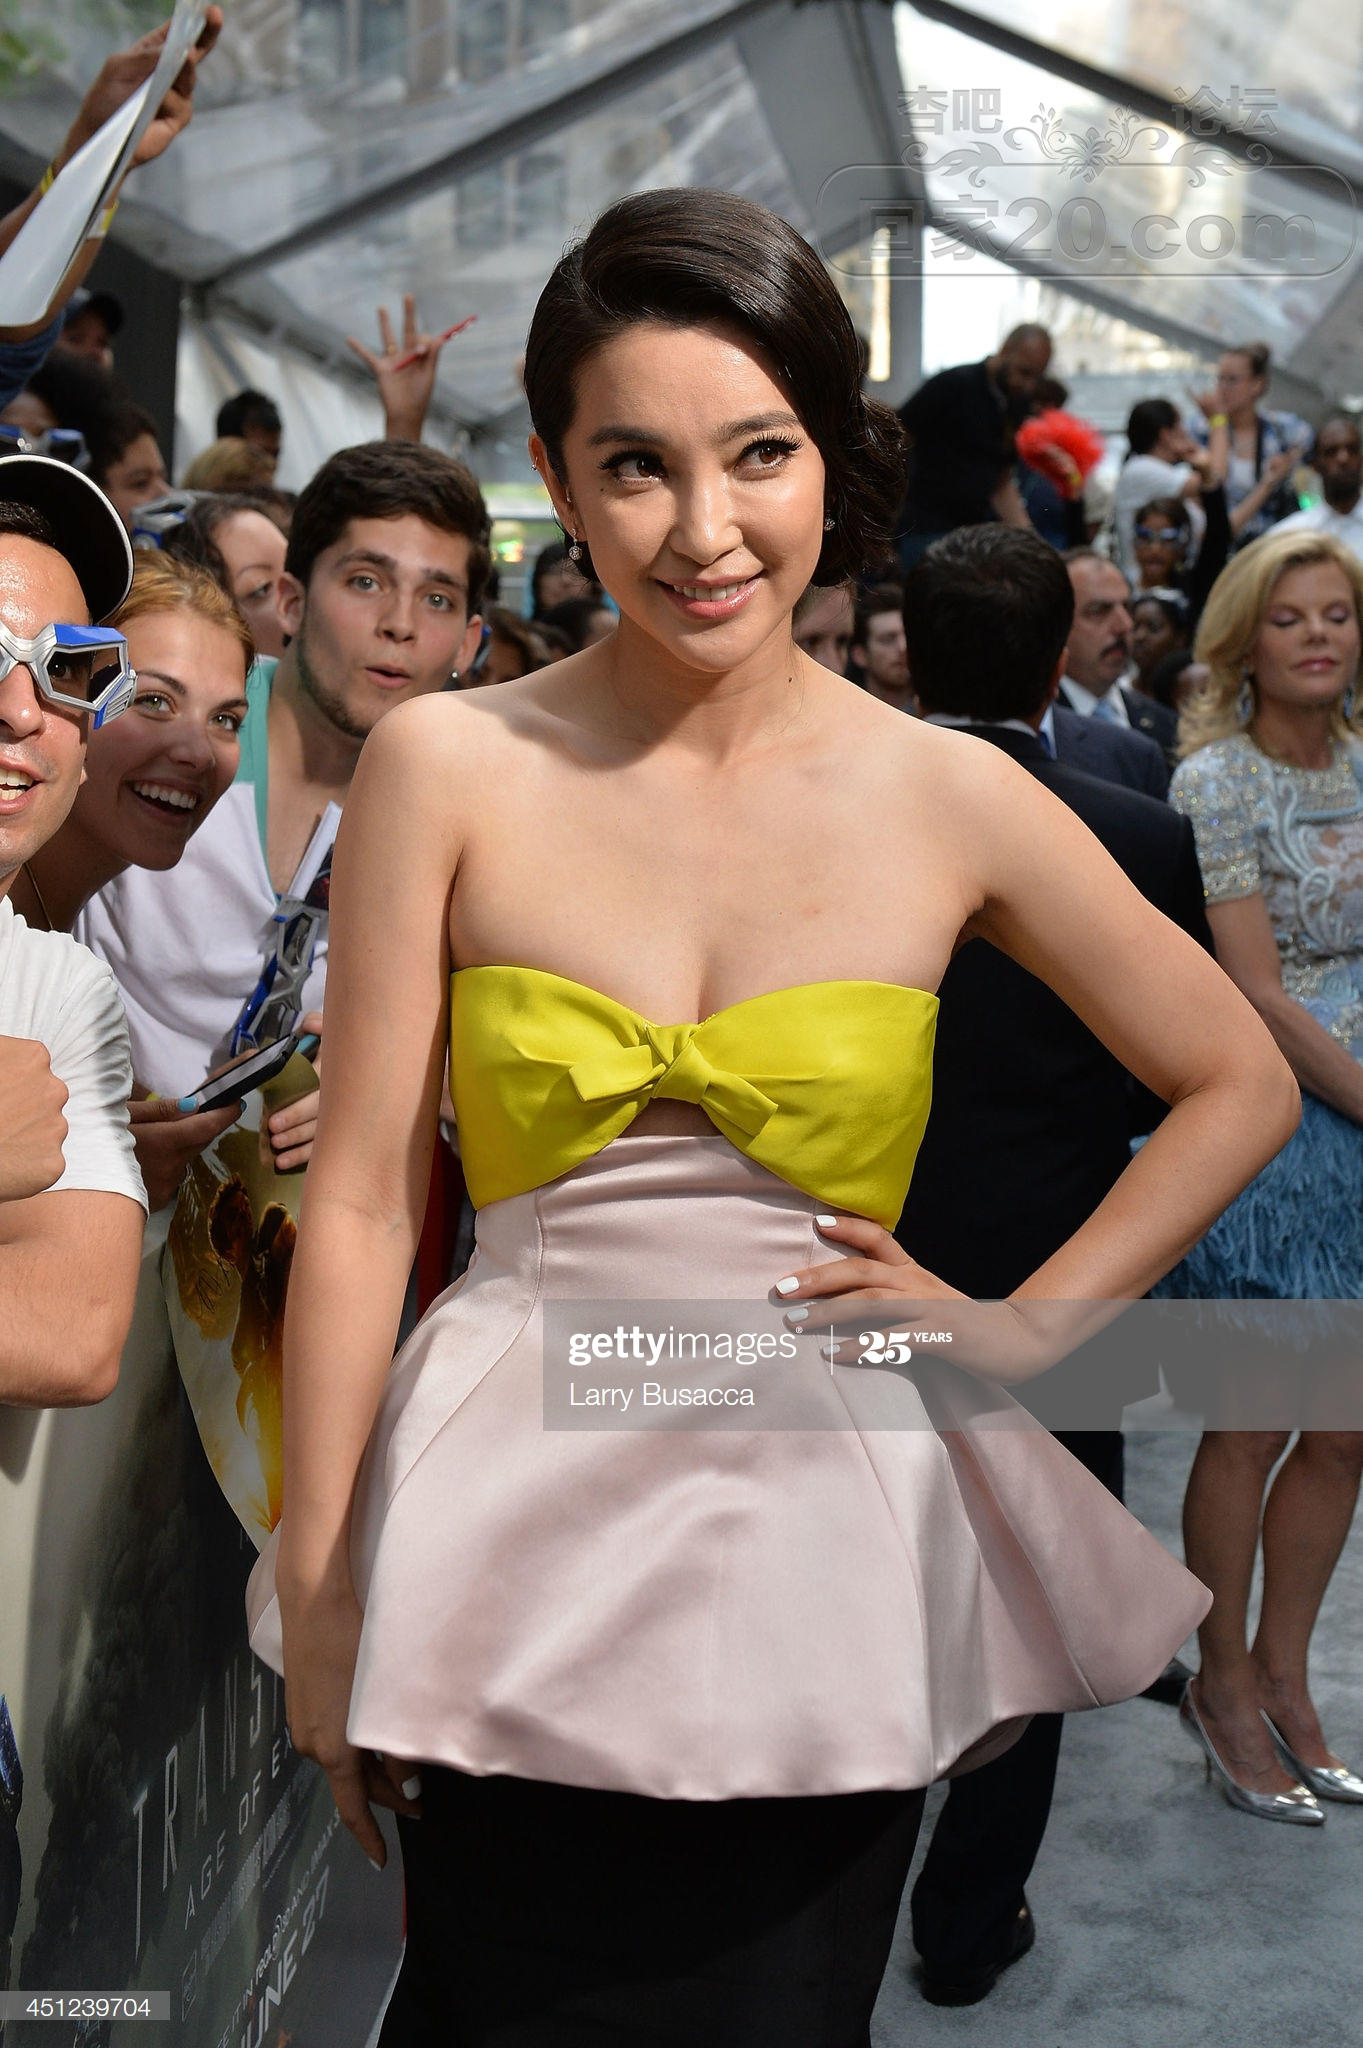 gettyimages-451239704-2048x2048.jpg